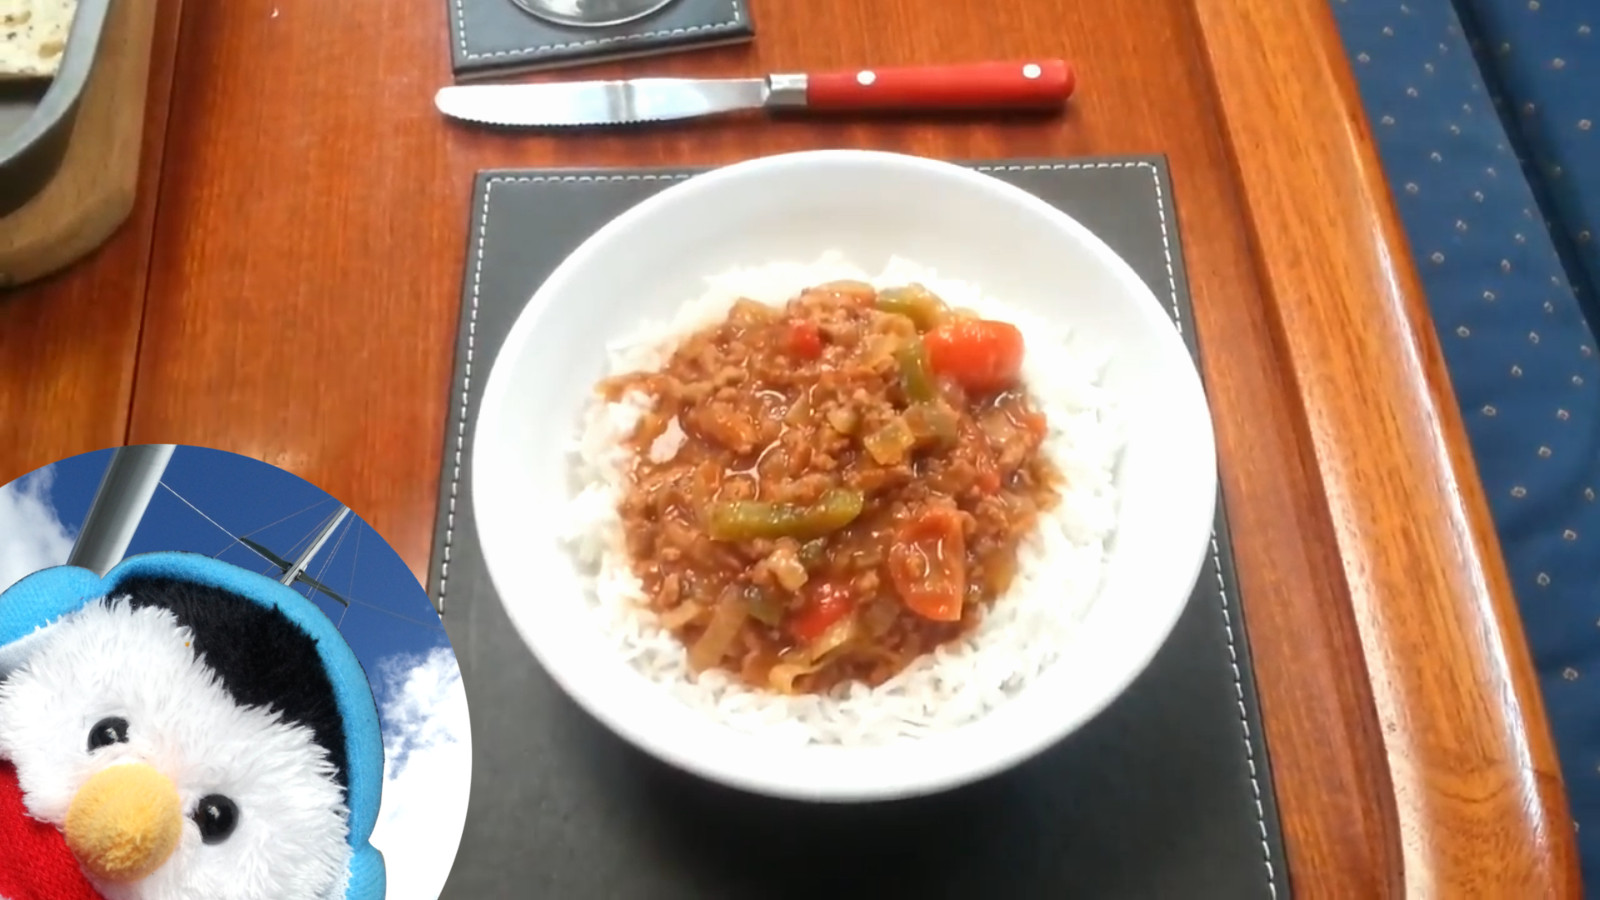 Watch our "Leftover Chilli" video and add comments etc.